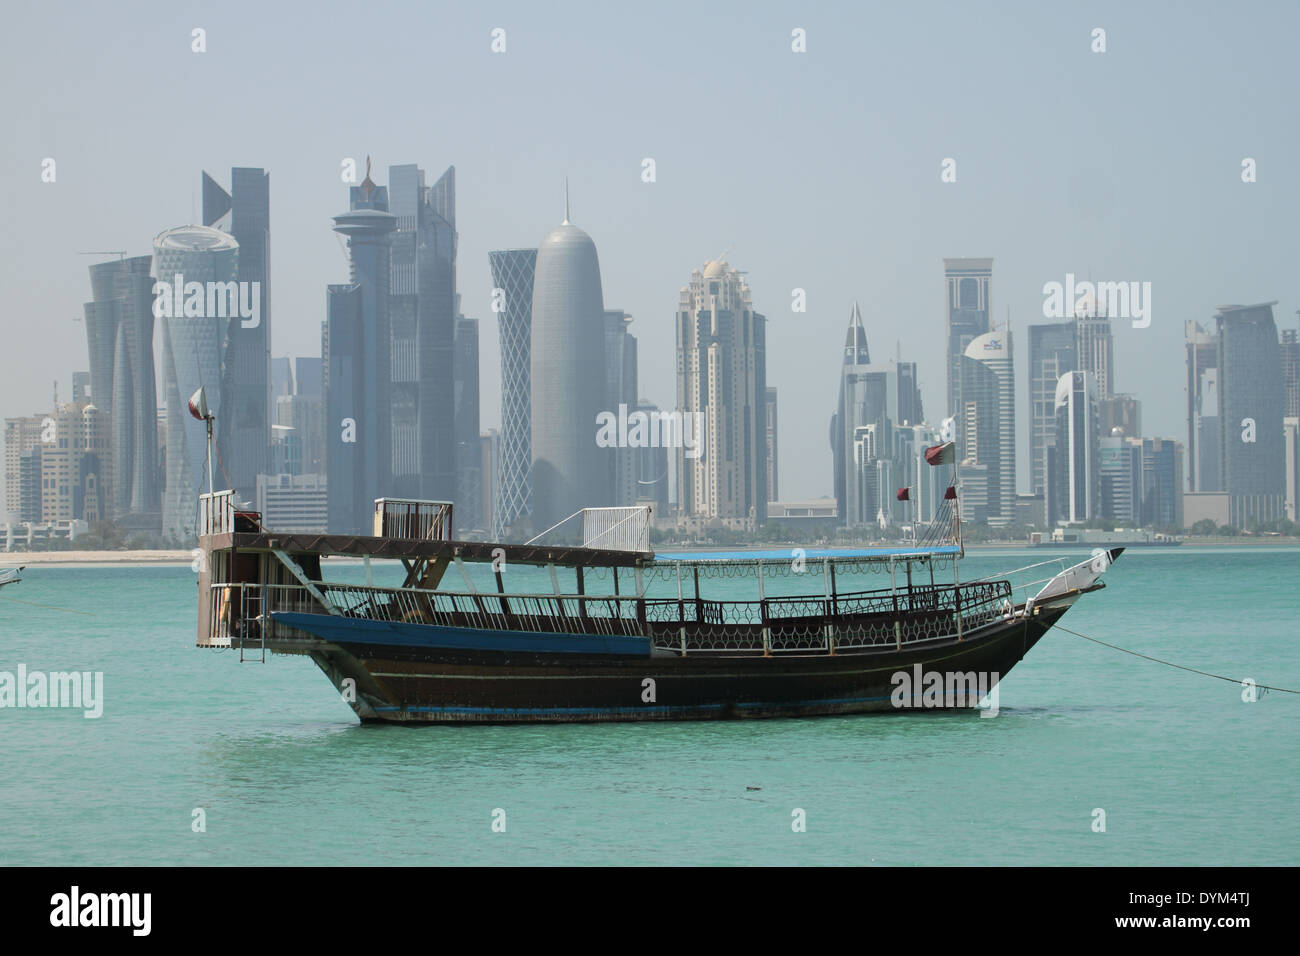 Doha, Qatar - 21 April 2014: A dhow seen with a backdrop of the Doha skyscrapers seen from the Corniche. Credit: David Mbiyu/Alamy Live News Stock Photo